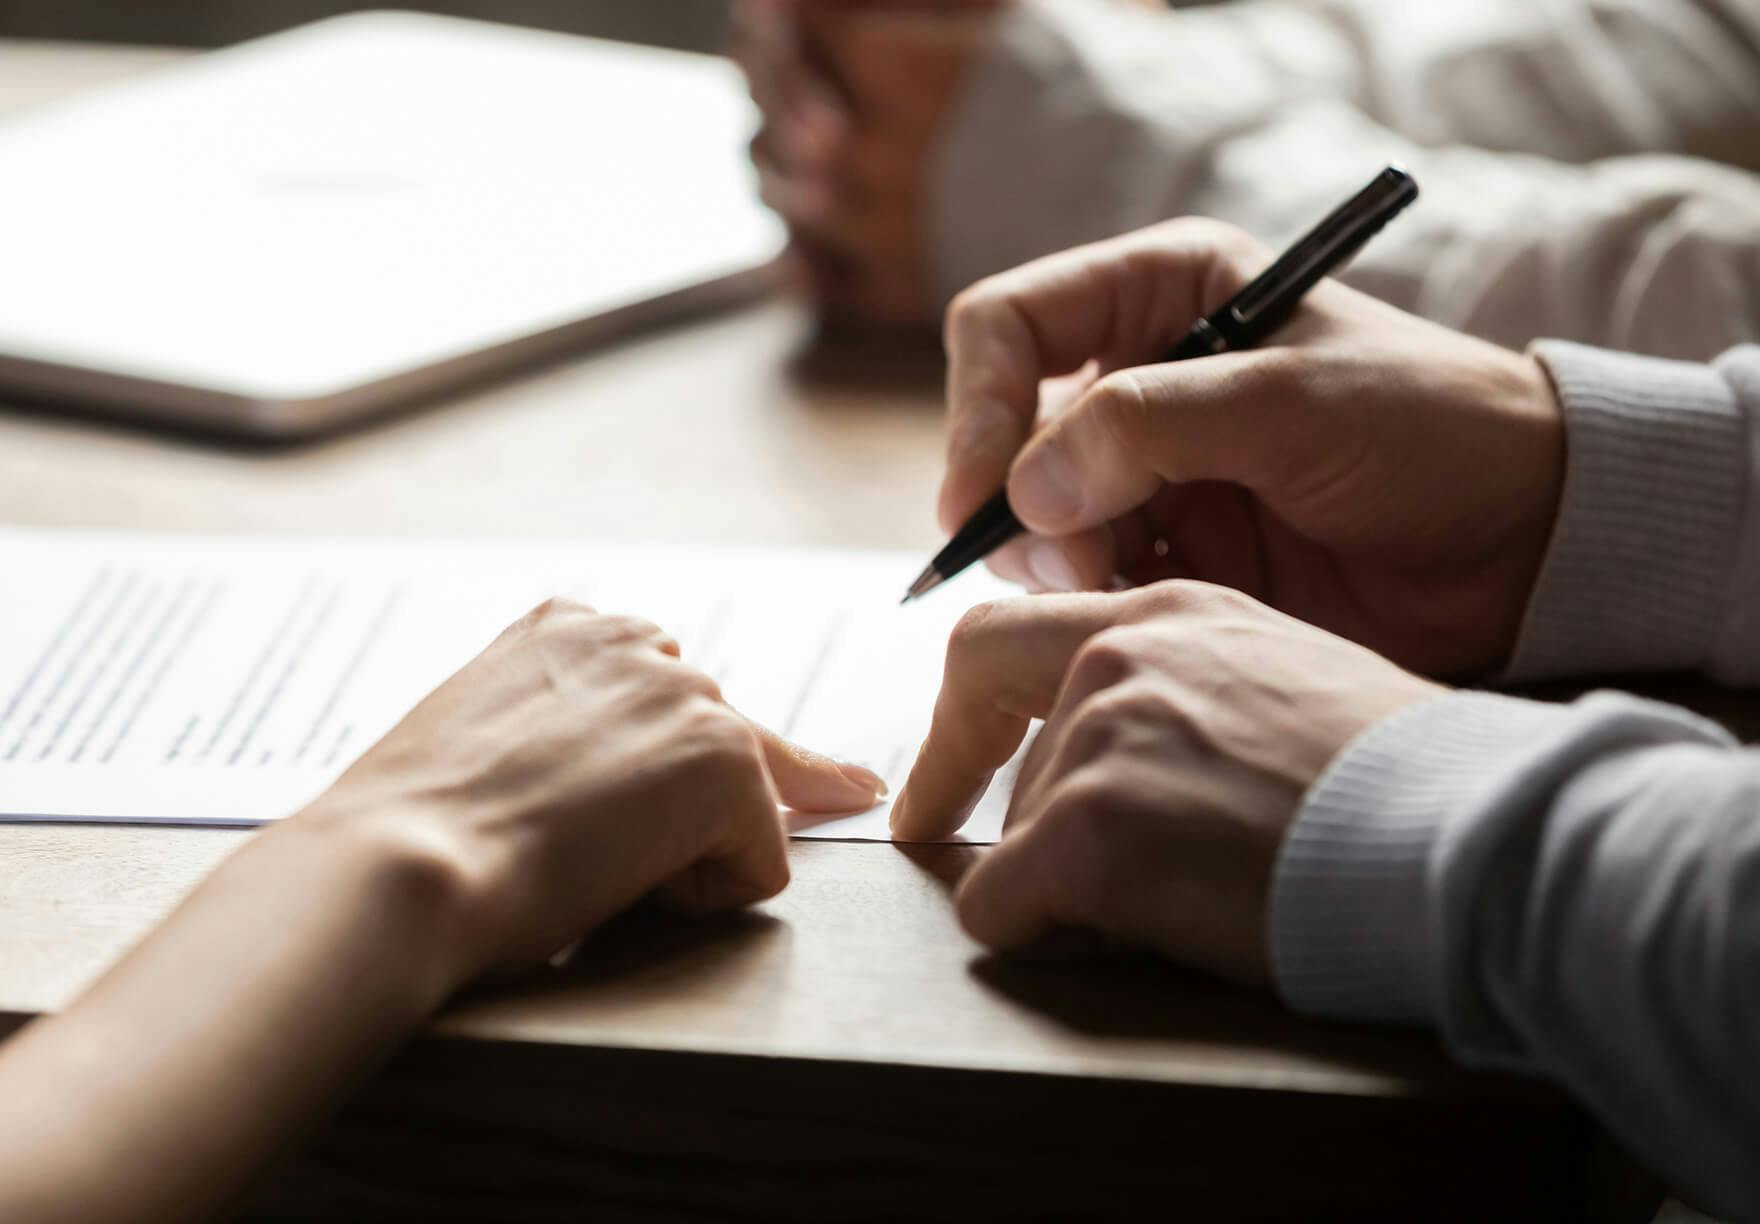 Two people signing a document at a table.